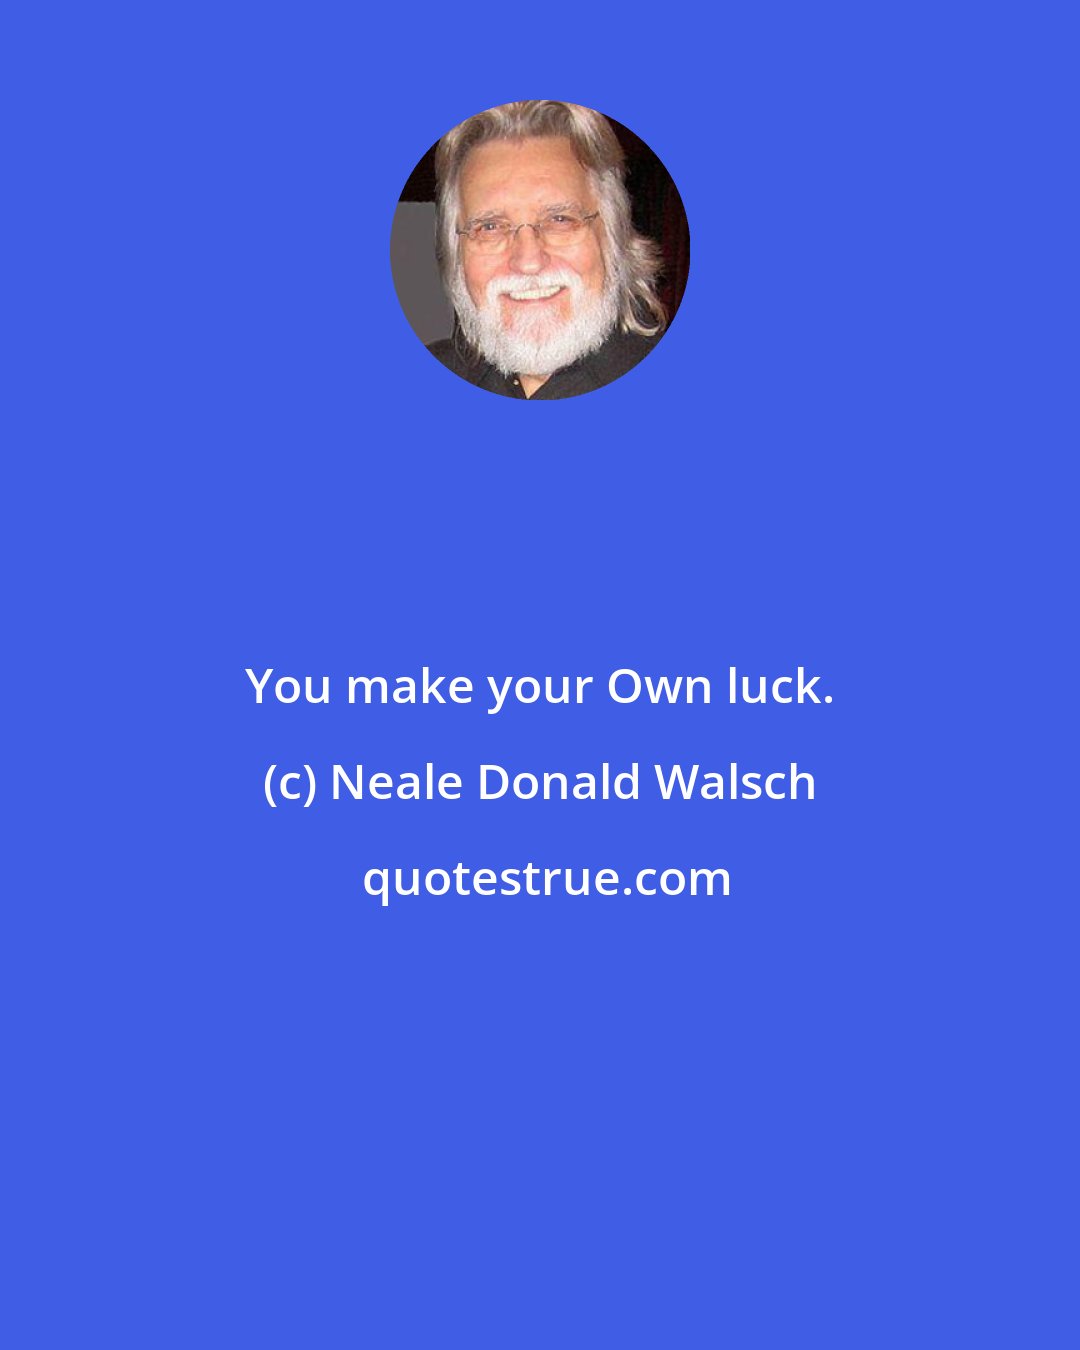 Neale Donald Walsch: You make your Own luck.